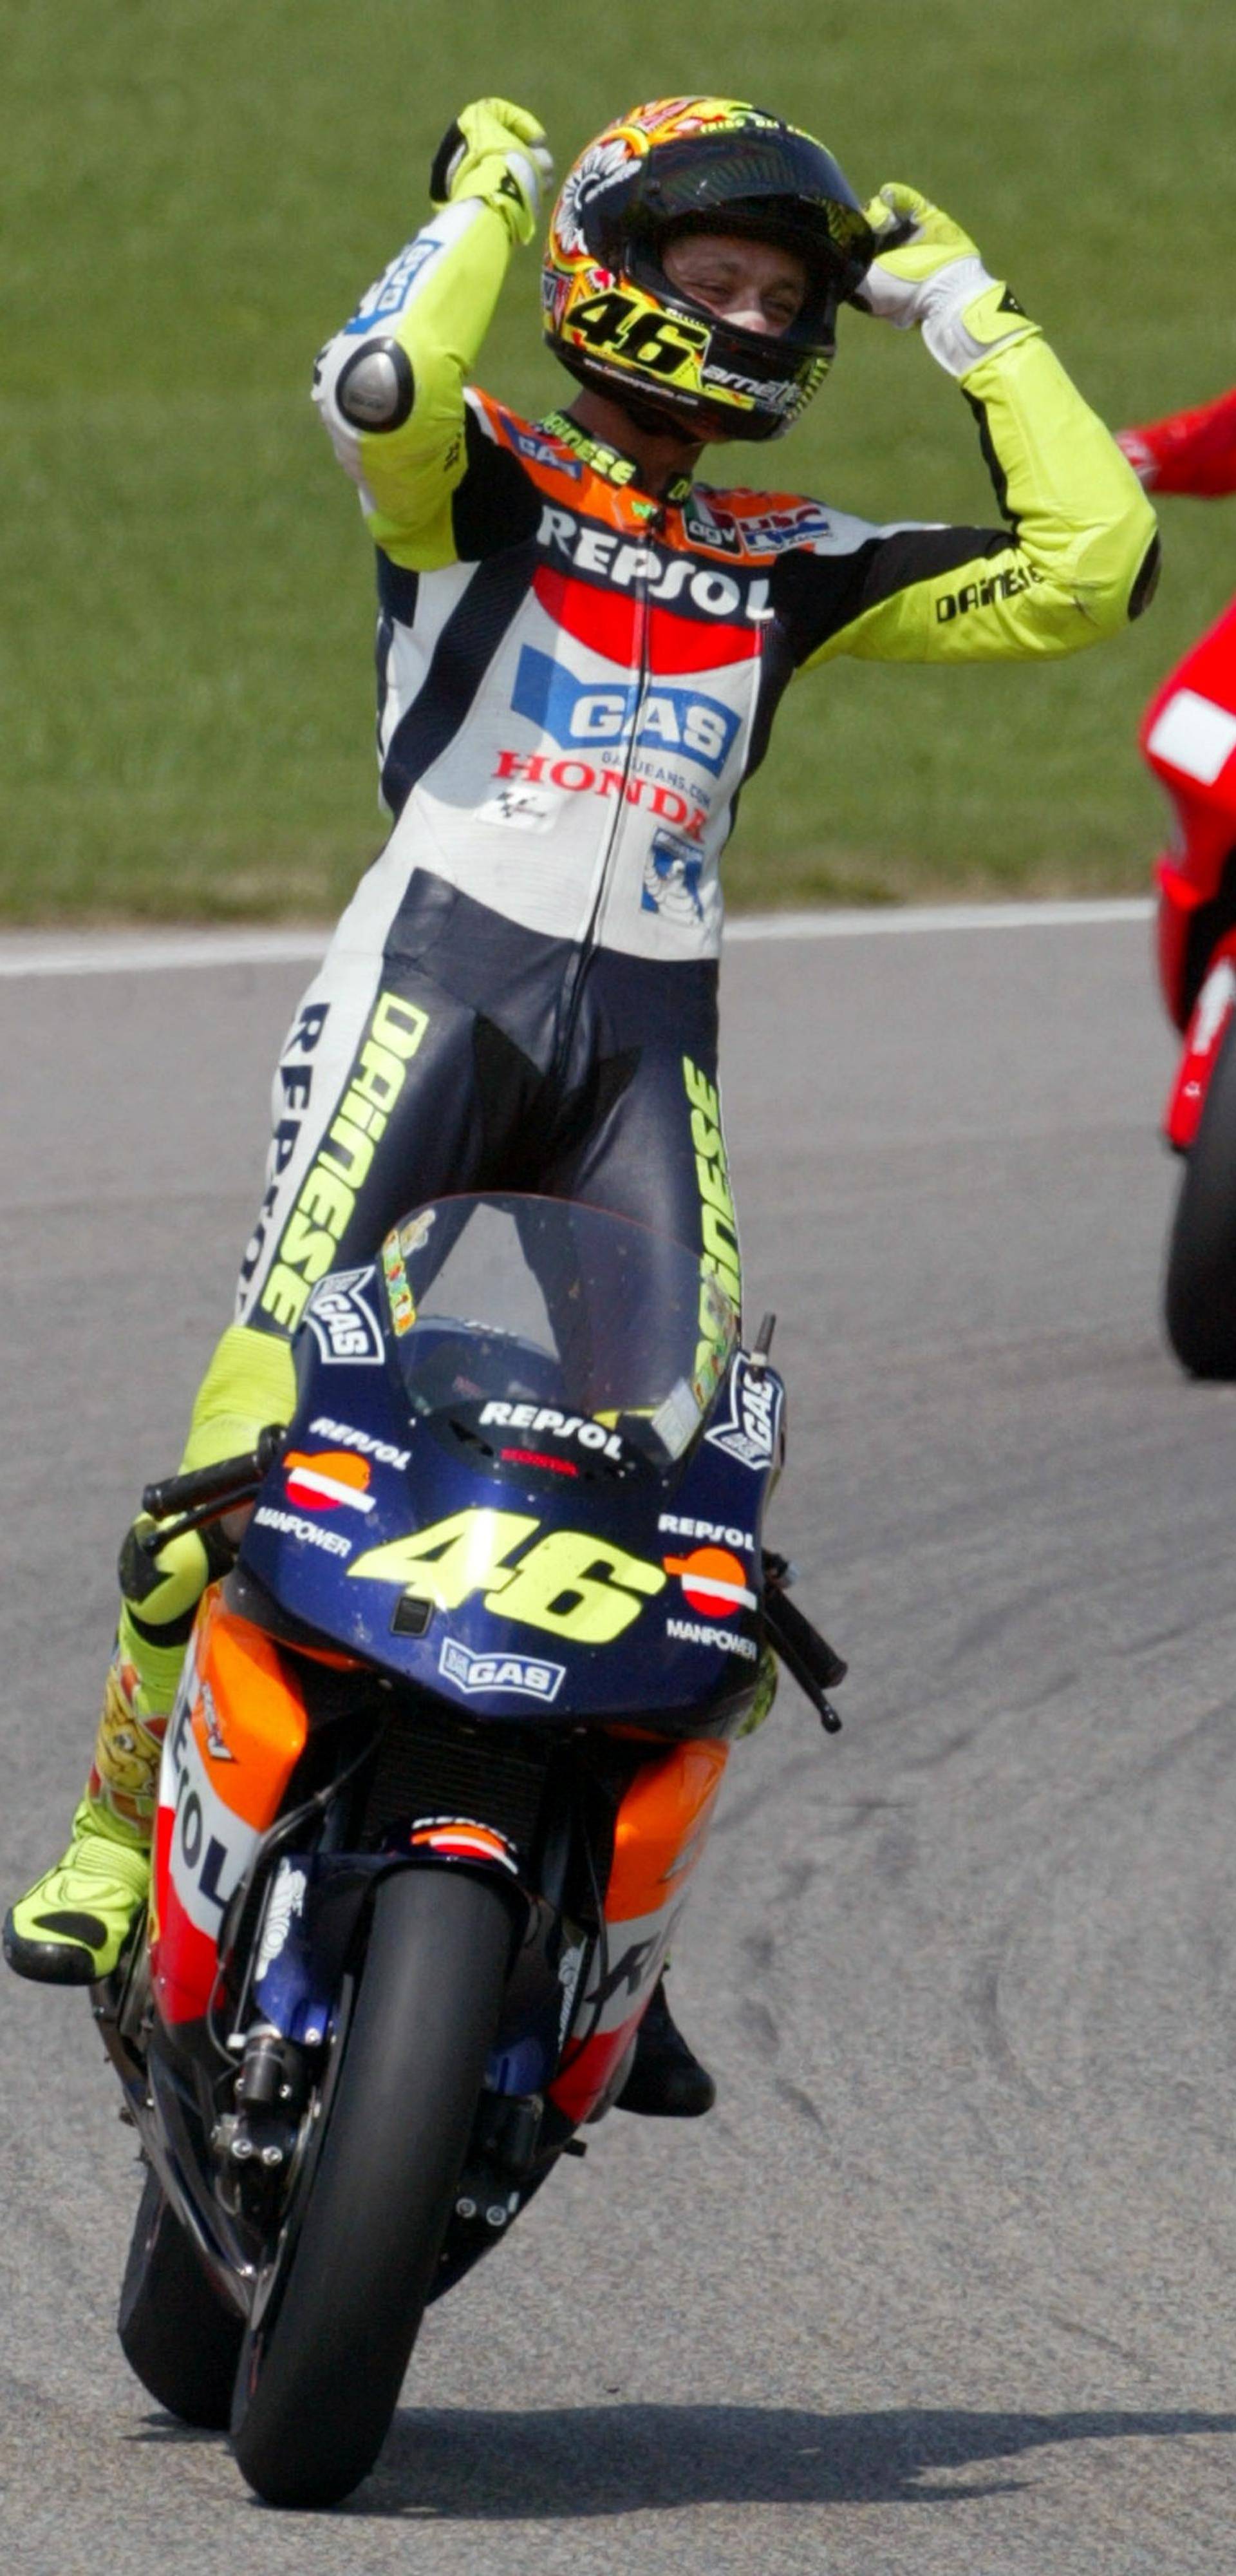 FILE PHOTO: ITALIAN MOTOGP RIDER ROSSI CELEBRATES AT MOTORCYCLING GRAND PRIX IN HOHENSTEIN ERNSTTHAL.